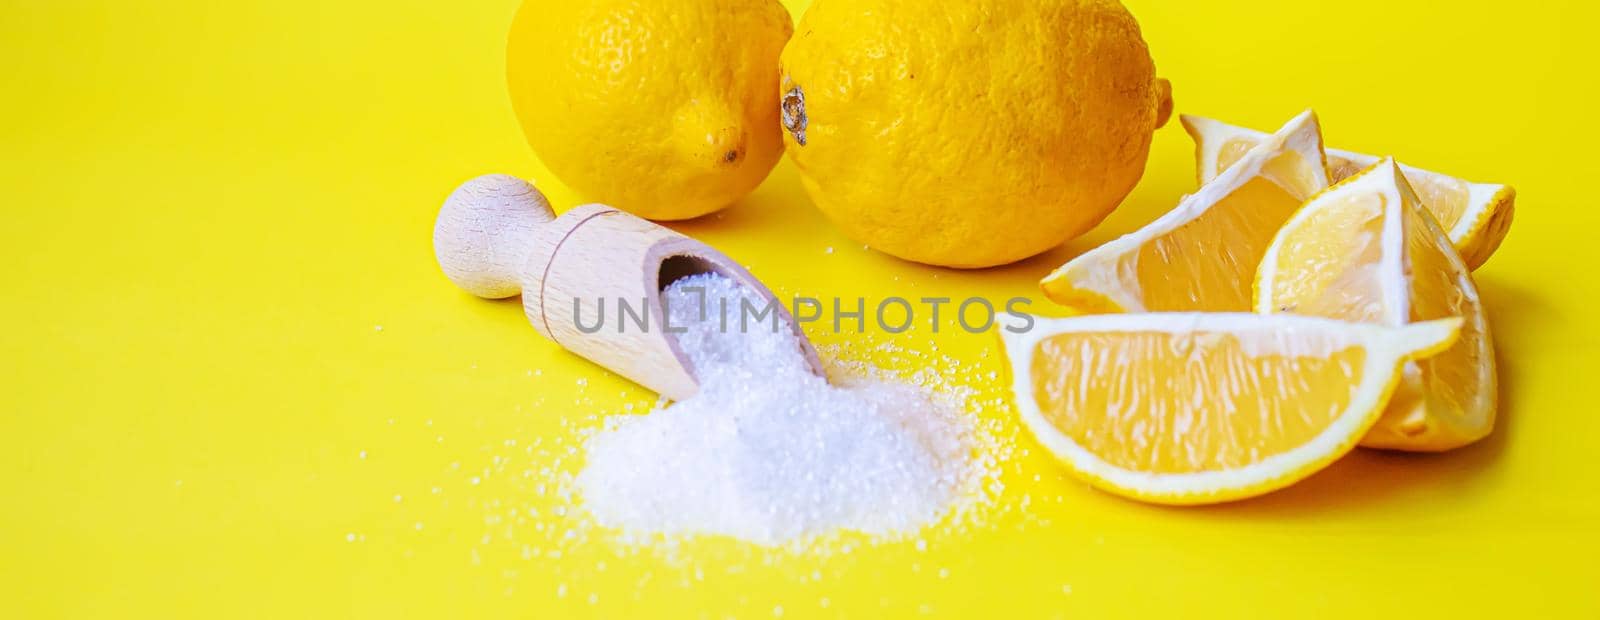 Citric acid on a yellow background. Selective focus.nature